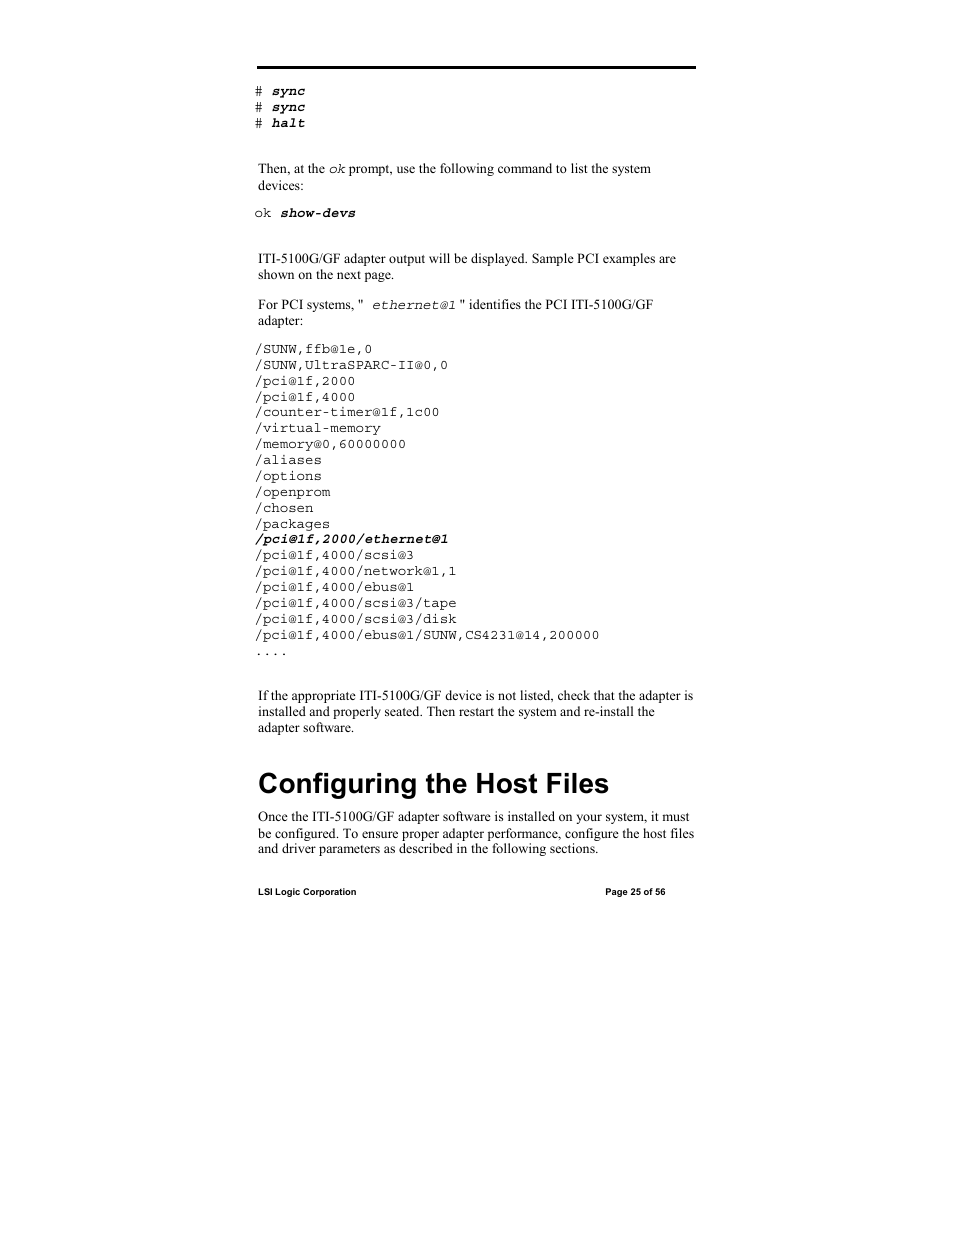 Configuring the host files | IntraServer Technology ITIpci 5100G/GF User Manual | Page 25 / 56